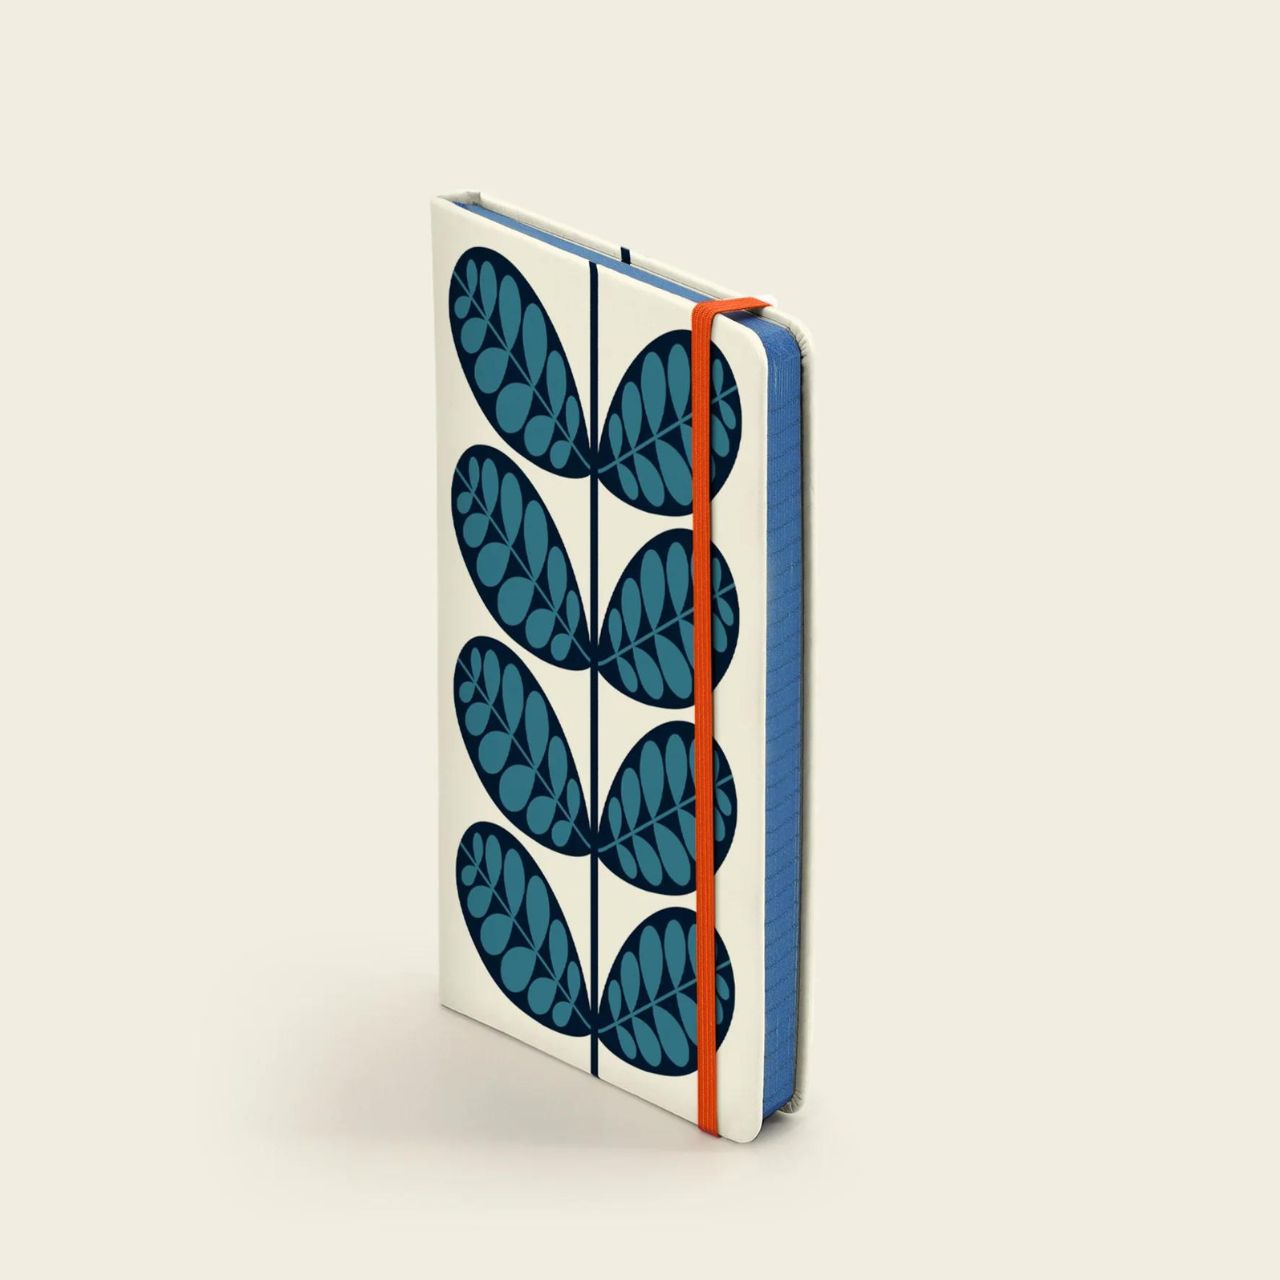 Orla Kiely Botanical Small Notebook  Write down your goals, plans and your weekly shopping list in style with our Botanica notebook. This notebook has a hardcover with rounded corners, an elastic closure and matching ribbon bookmark. Comes with a lined paper layout and expandable inner back pocket.